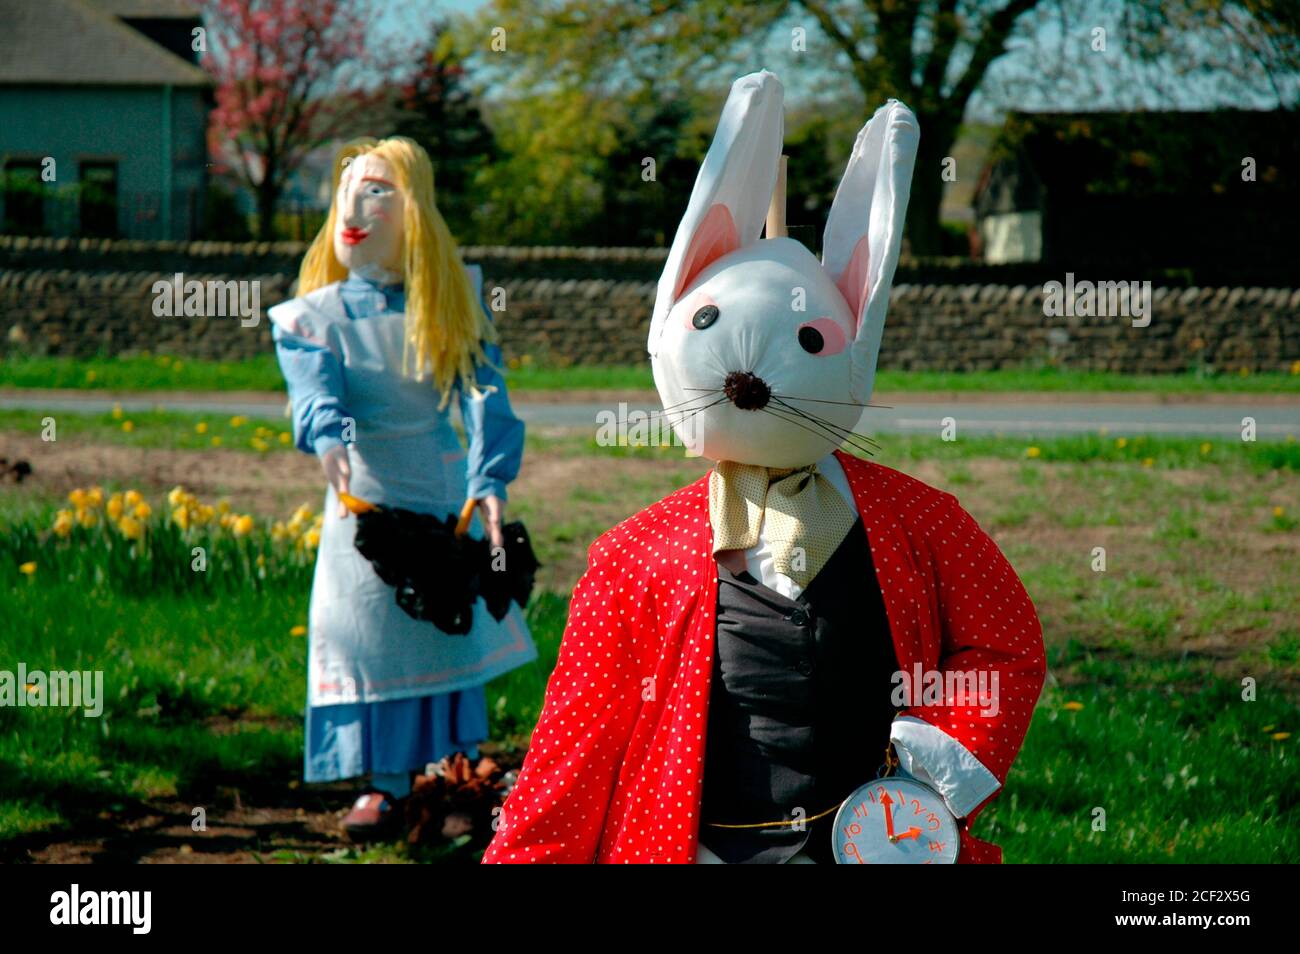 An exhibit at the Scarecrow Festival held annually at the village of Wray, near Lancaster, UK. Alice and the White Rabbit from Alice in Wonderland. Stock Photo